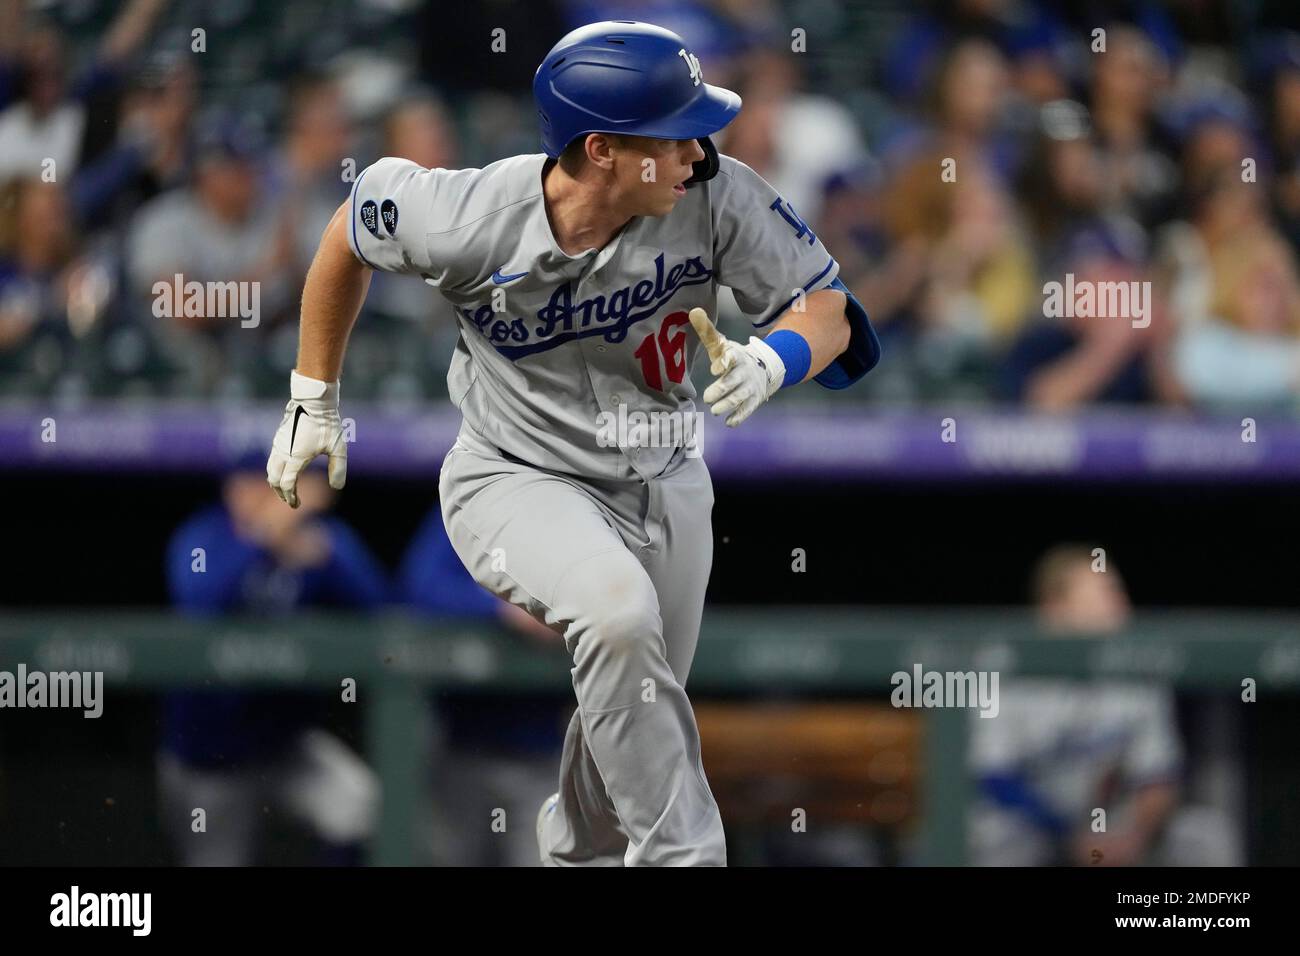 Los Angeles Dodgers catcher Will Smith (16) waits for the pitch during an  MLB regular season game against the San Francisco Giants, Tuesday, May 3,  2022, in Los Angeles, CA. (Brandon Sloter/Image